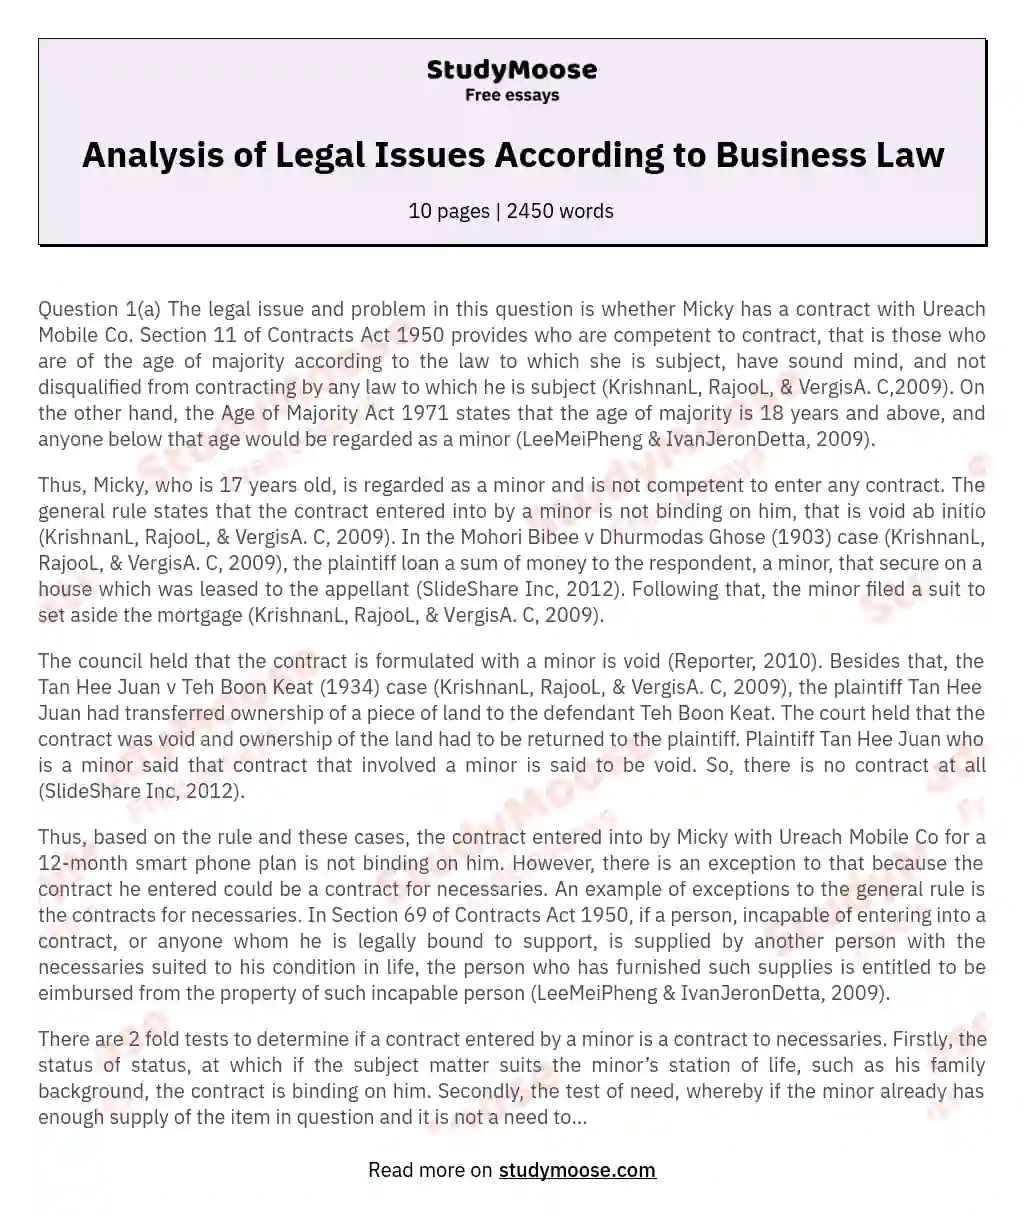 Analysis of Legal Issues According to Business Law essay